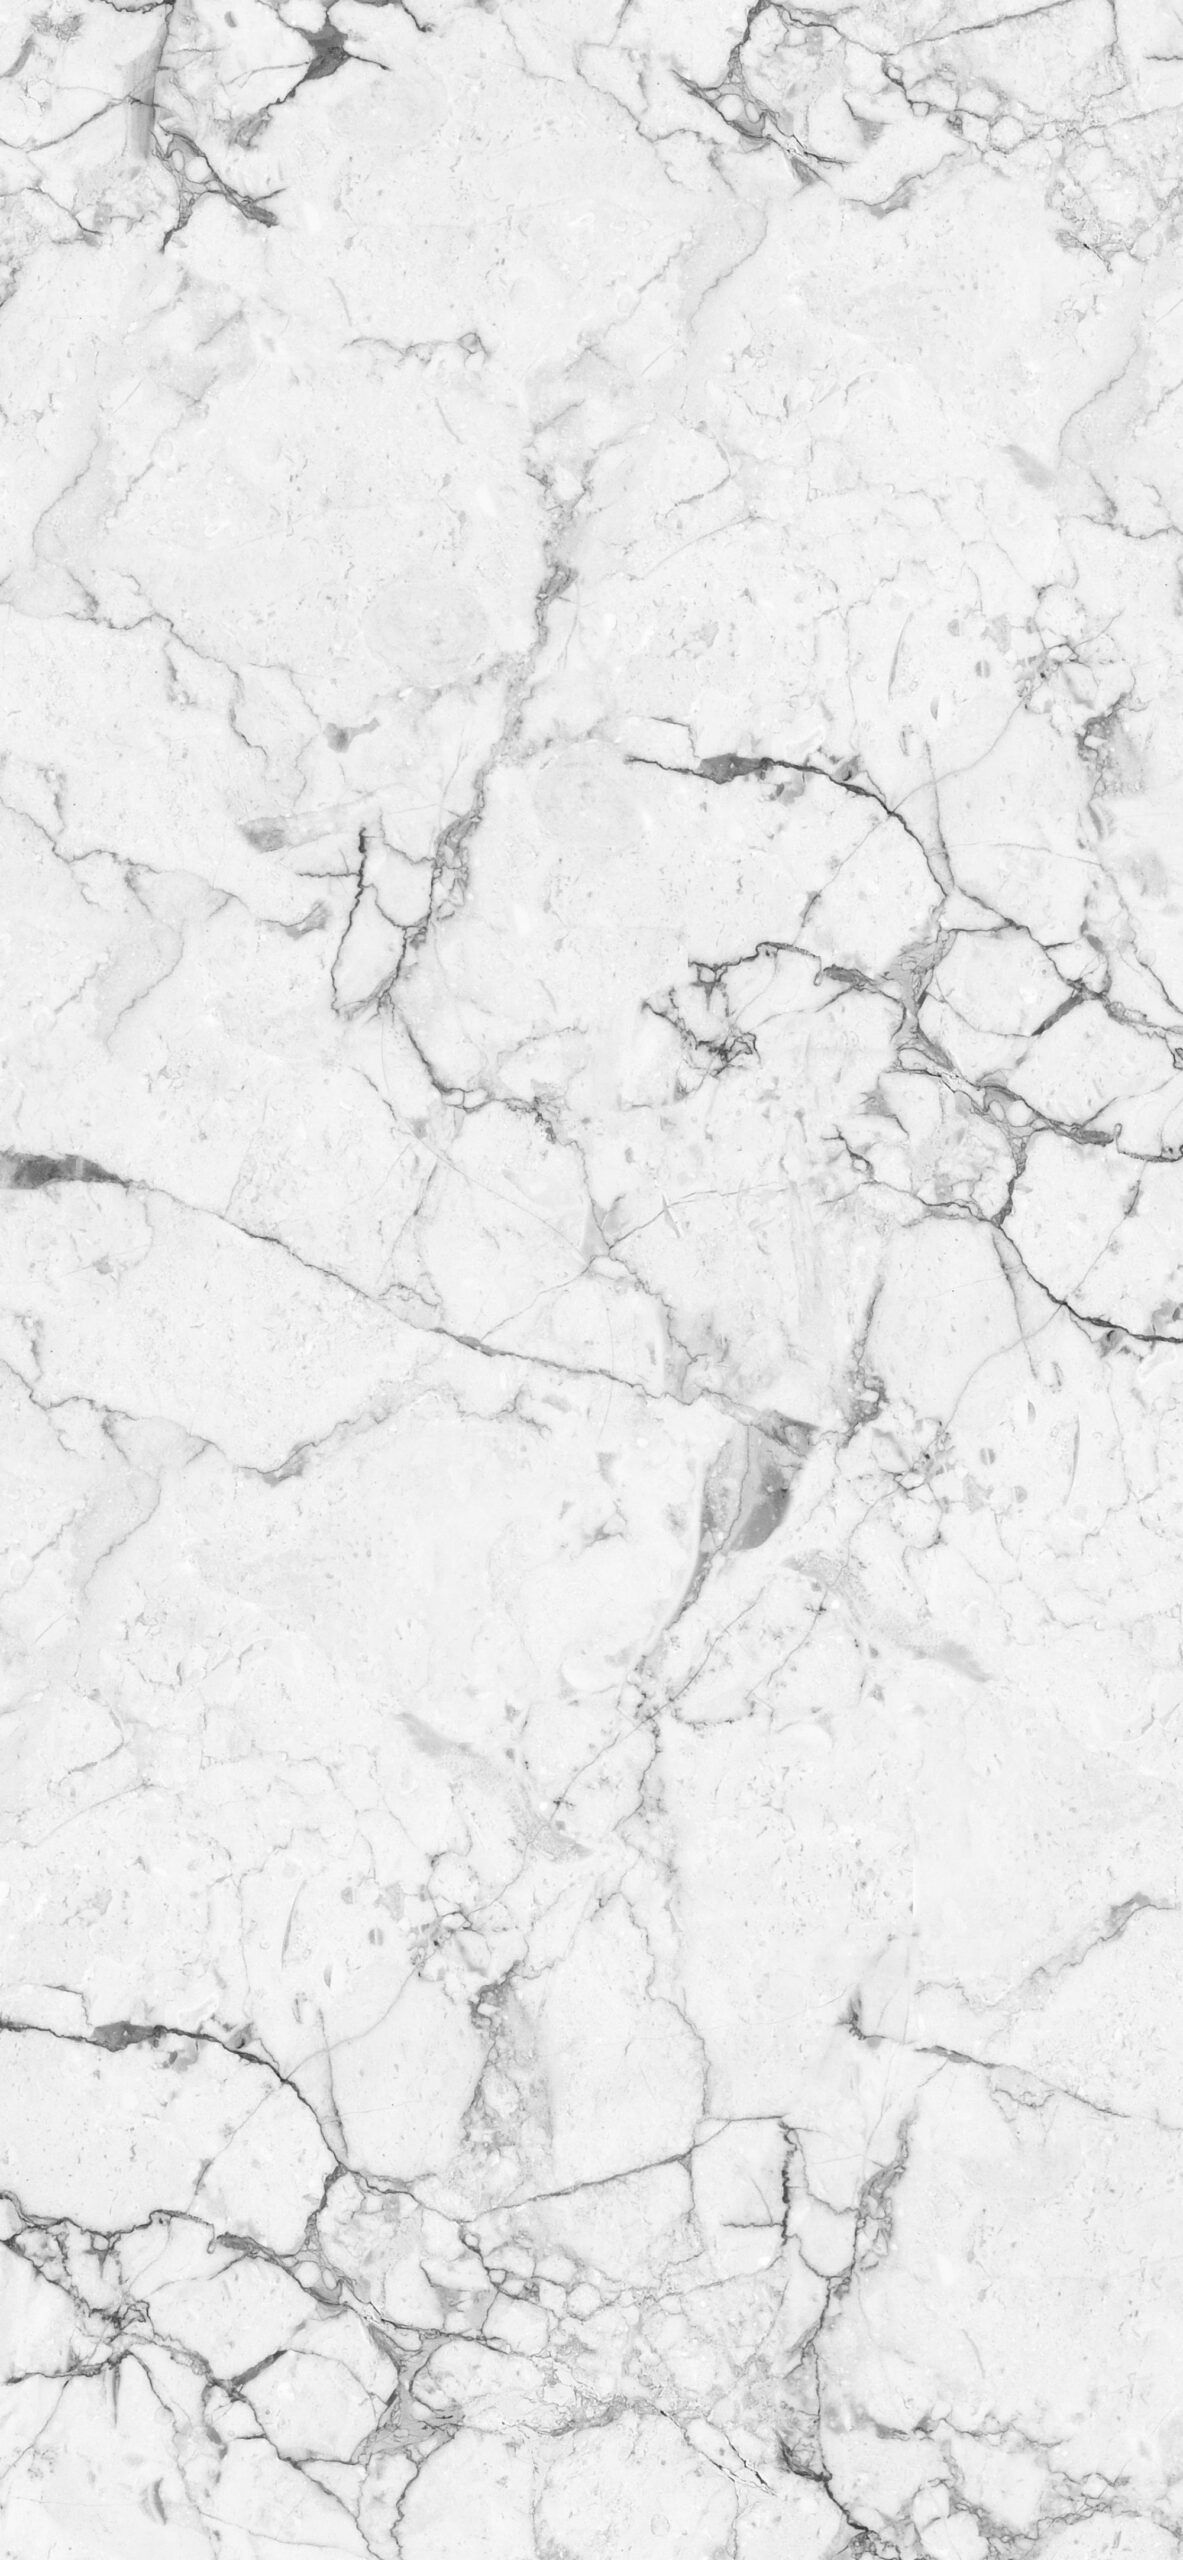 A white and grey marble texture background - Marble